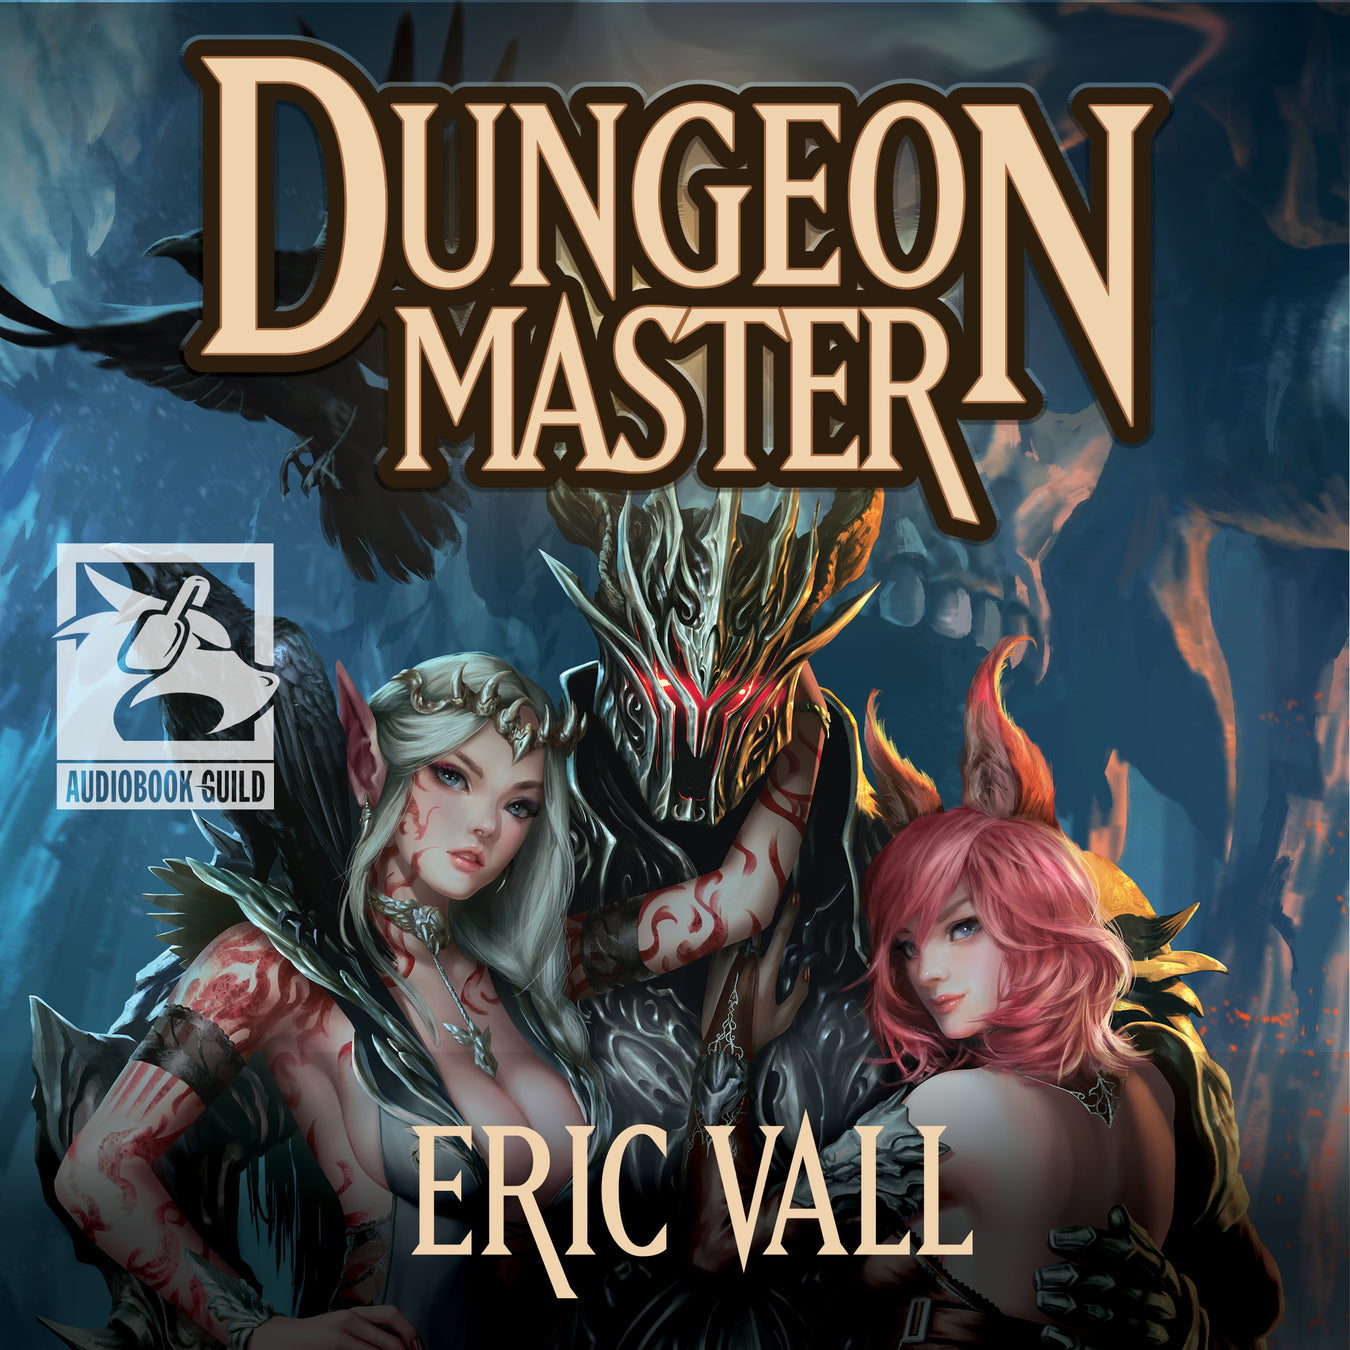 Dungeon Master by Eric Vall